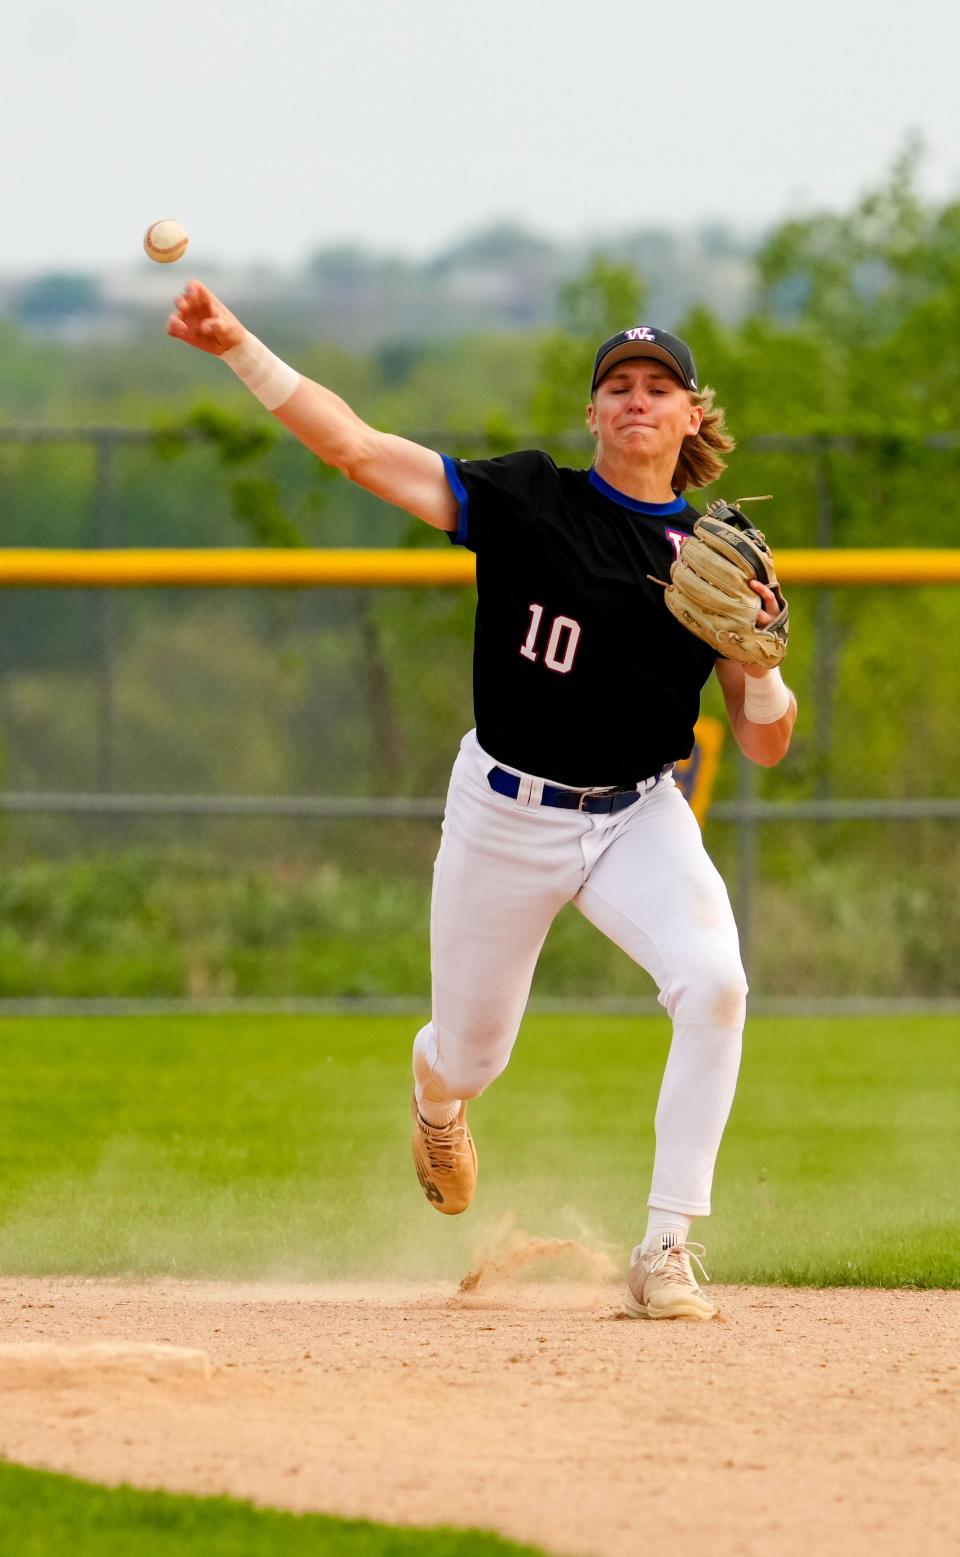 Wisconsin Lutheran infielder Eddie Rynders is headed for Kent State after his senior season is an MLB draft prospect.